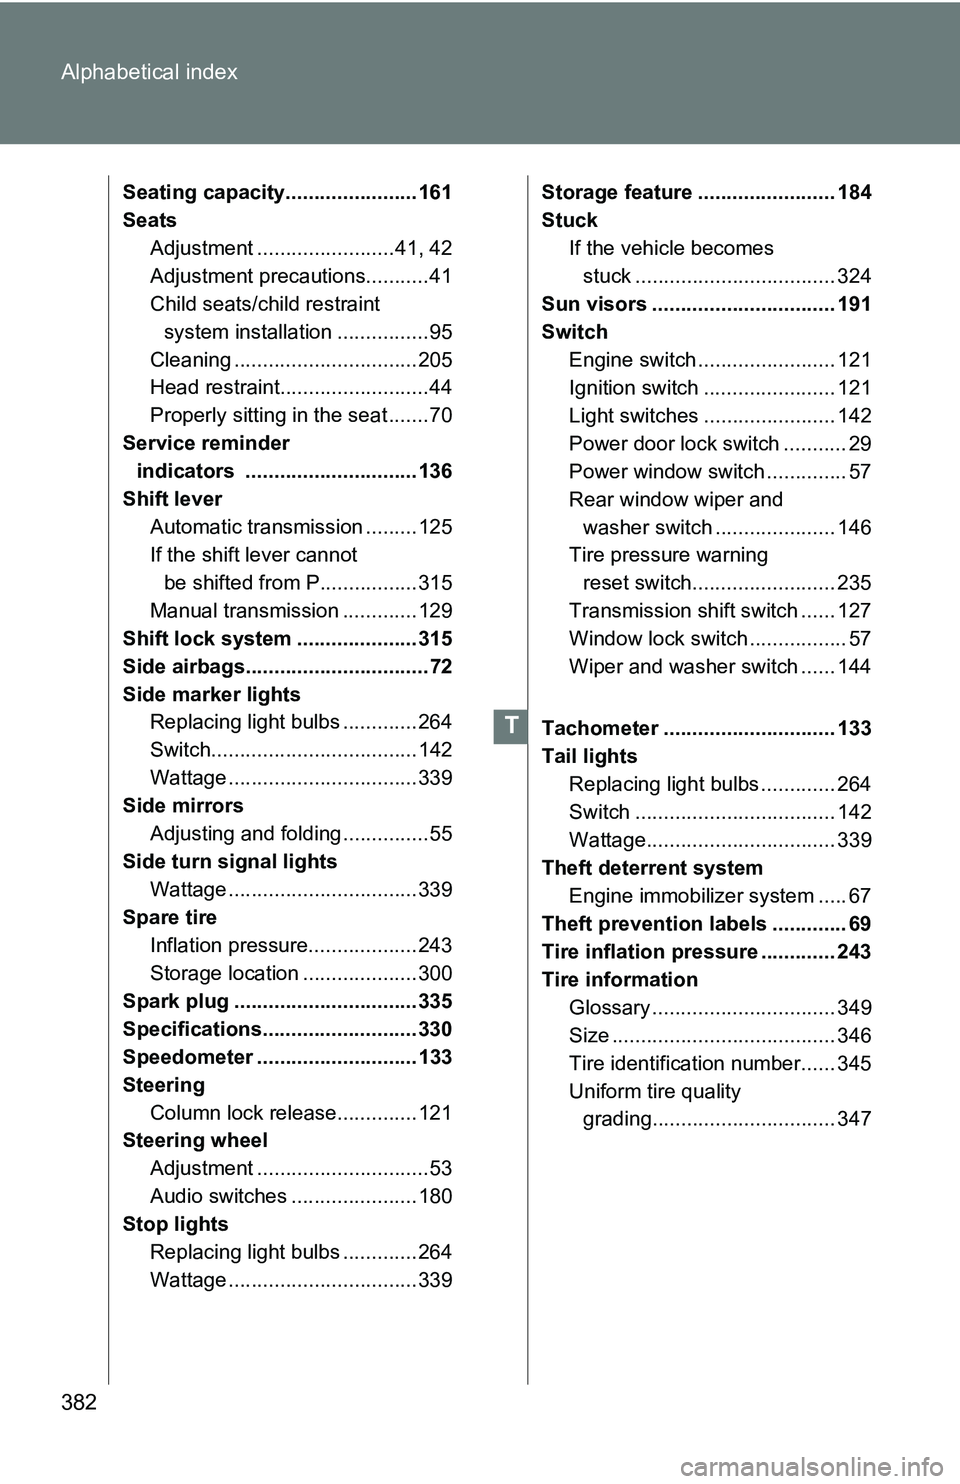 TOYOTA xB 2011  Owners Manual (in English) 382 Alphabetical index
Seating capacity....................... 161
SeatsAdjustment ........................41, 42
Adjustment precautions........... 41
Child seats/child restraint system installation .